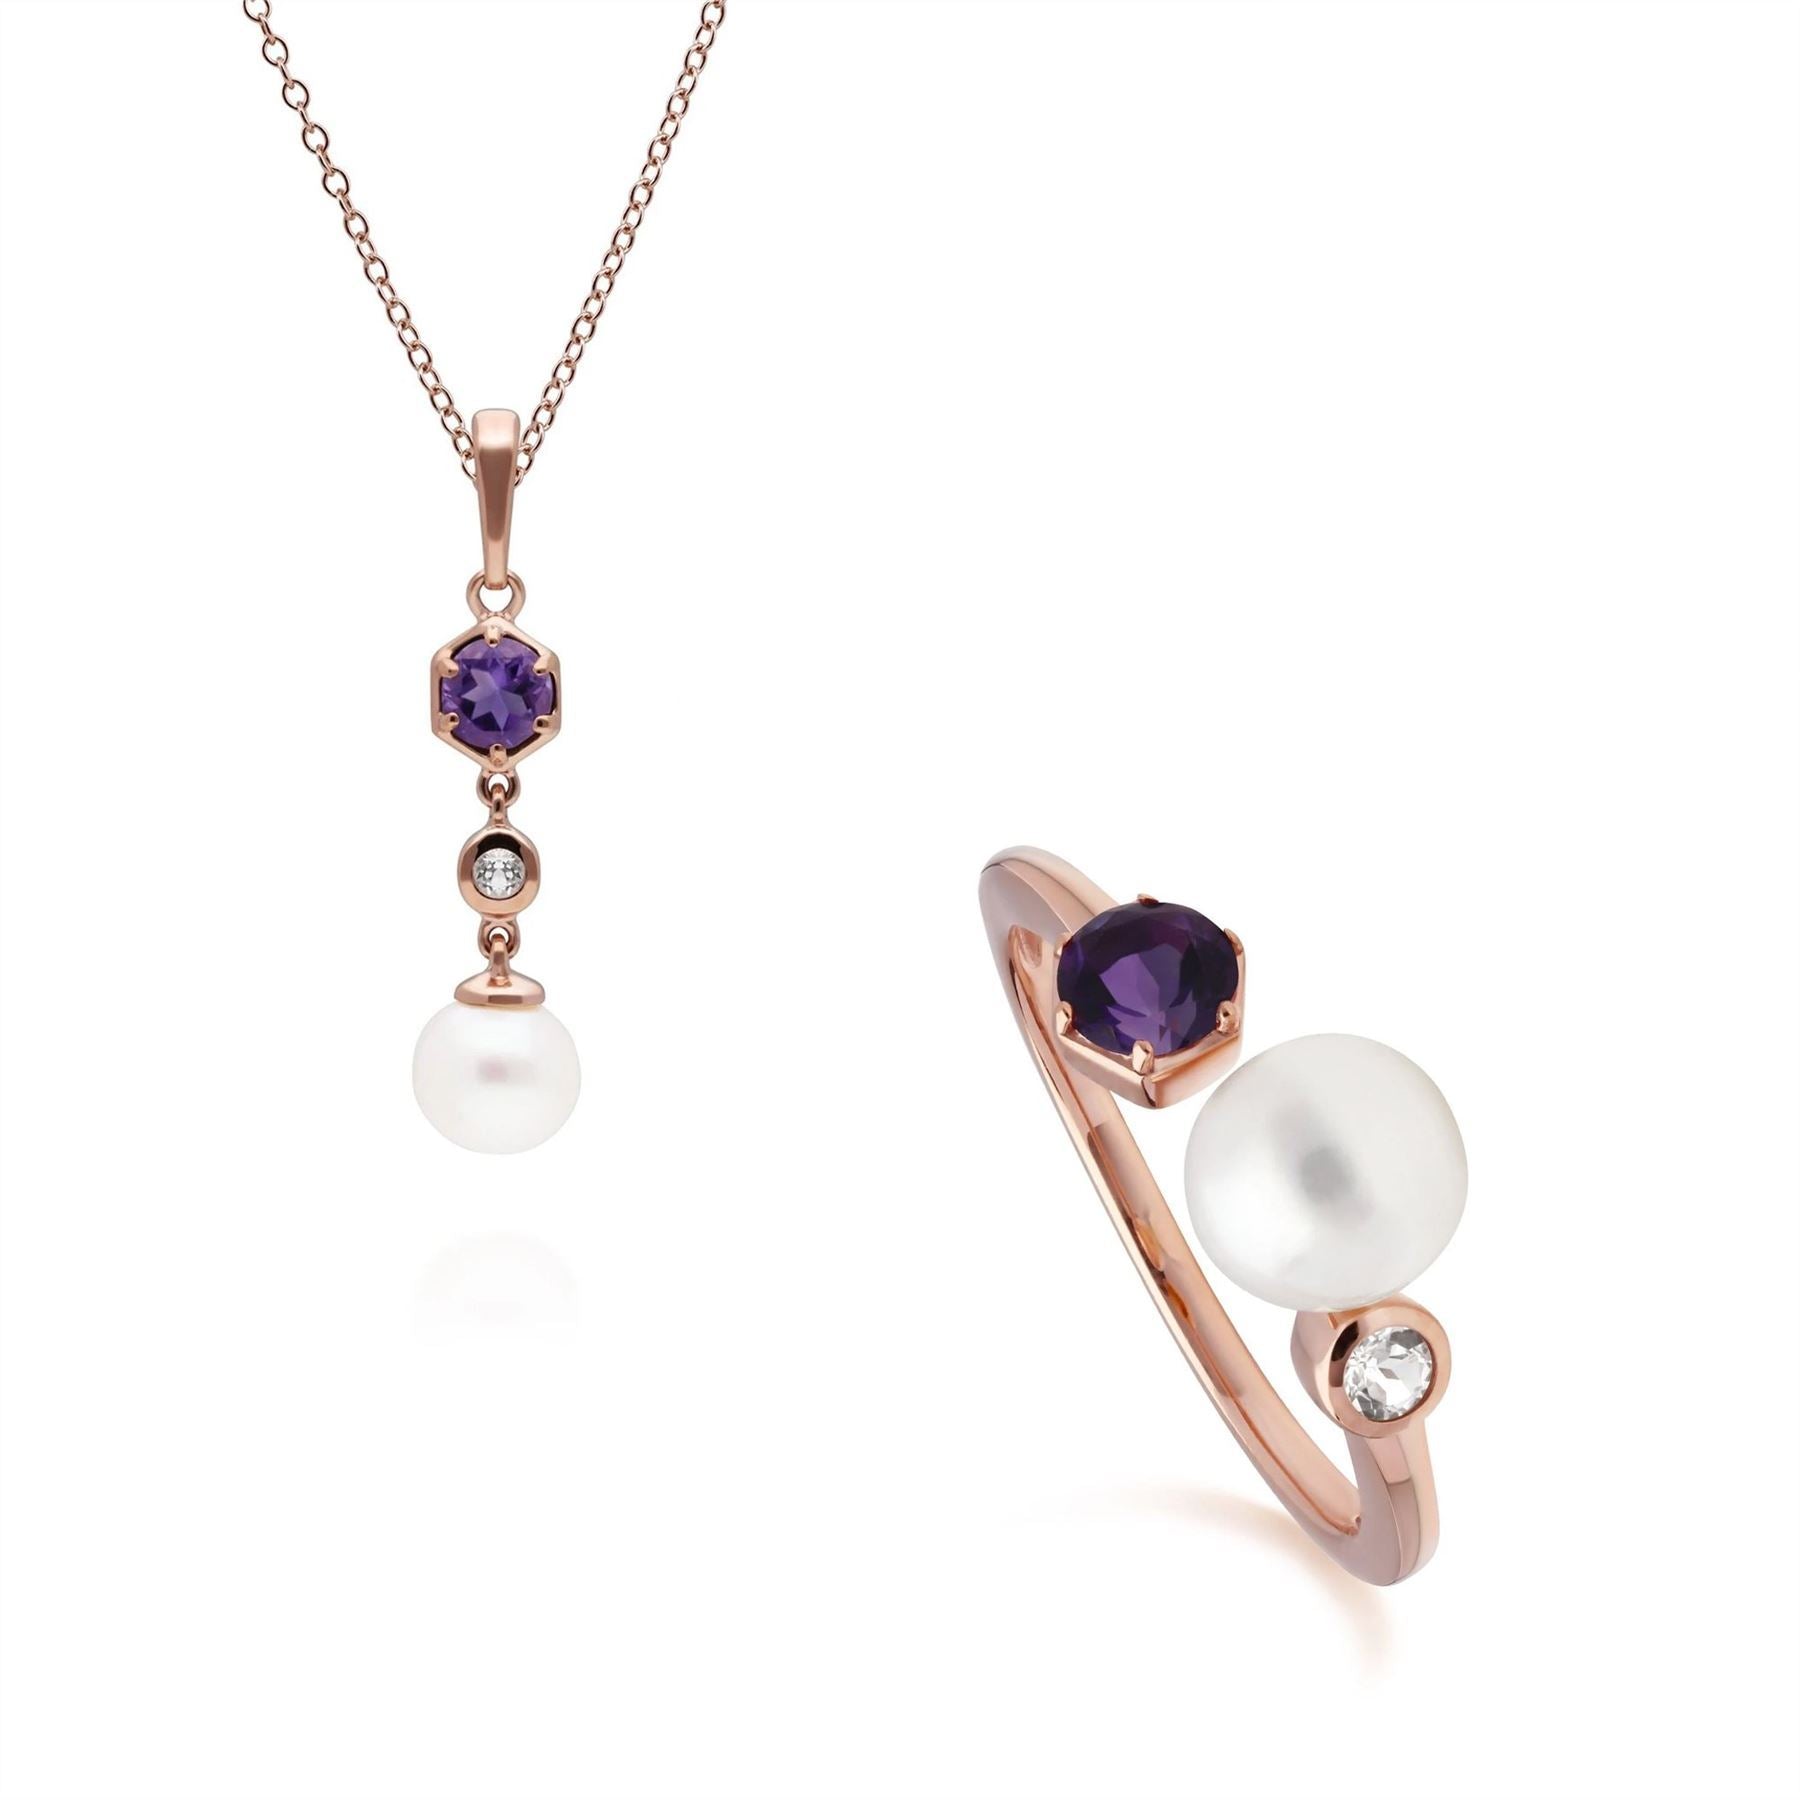 Modern Pearl, Amethyst & Topaz Pendant & Ring Set in Rose Gold Plated Sterling Silver